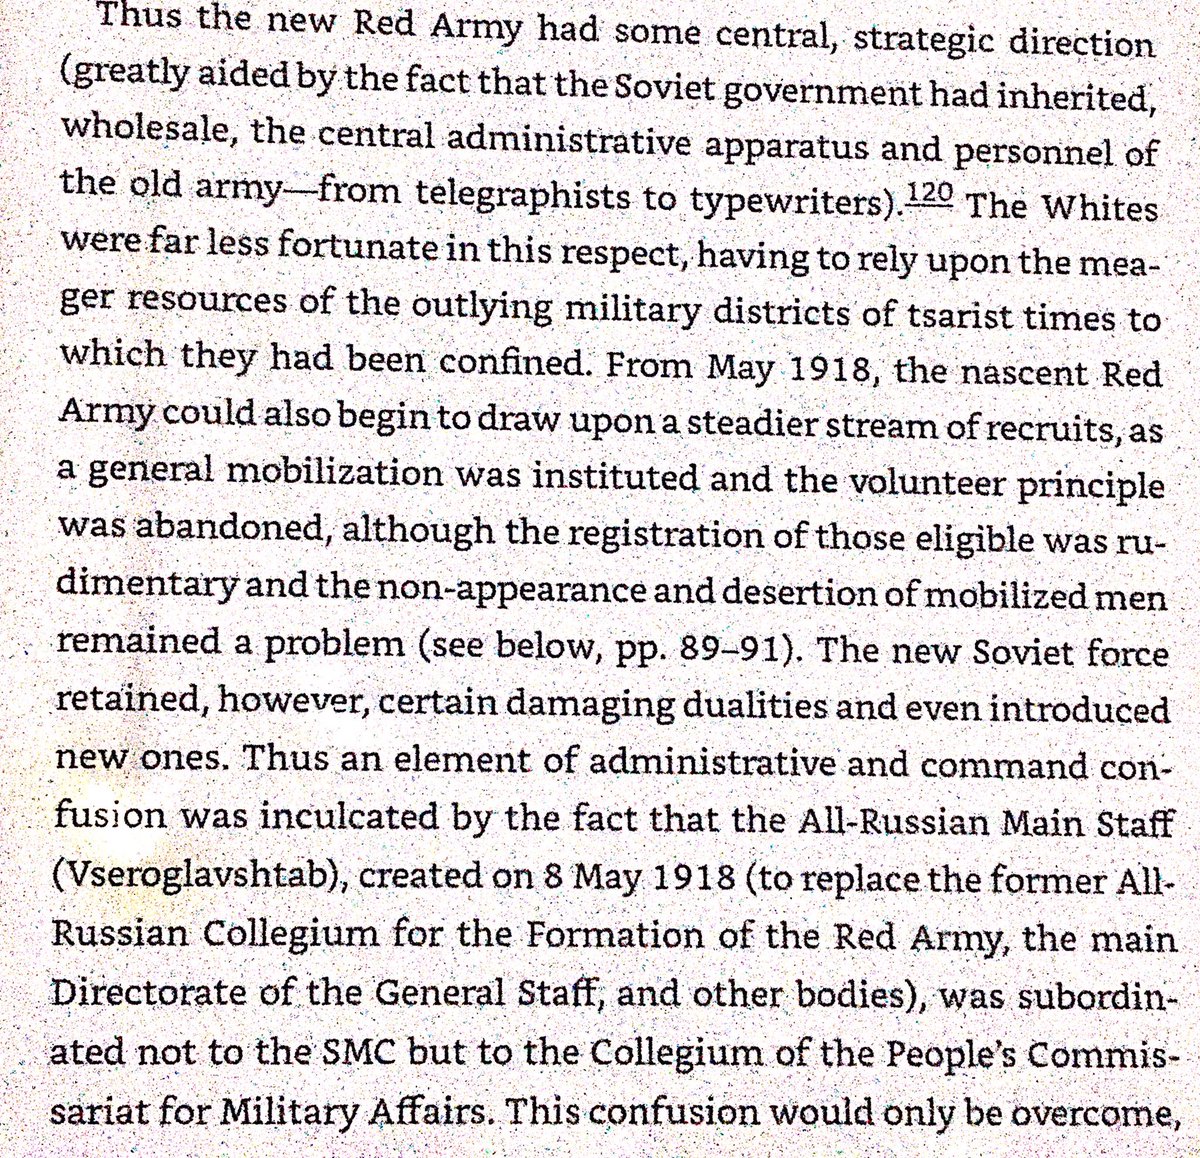 Bolshevik inheritance of the government & military bureaucracy gave them a tremendous advantage over the Whites in organization, communication, & recruitment. Red Army tripled in size over course of 1919.